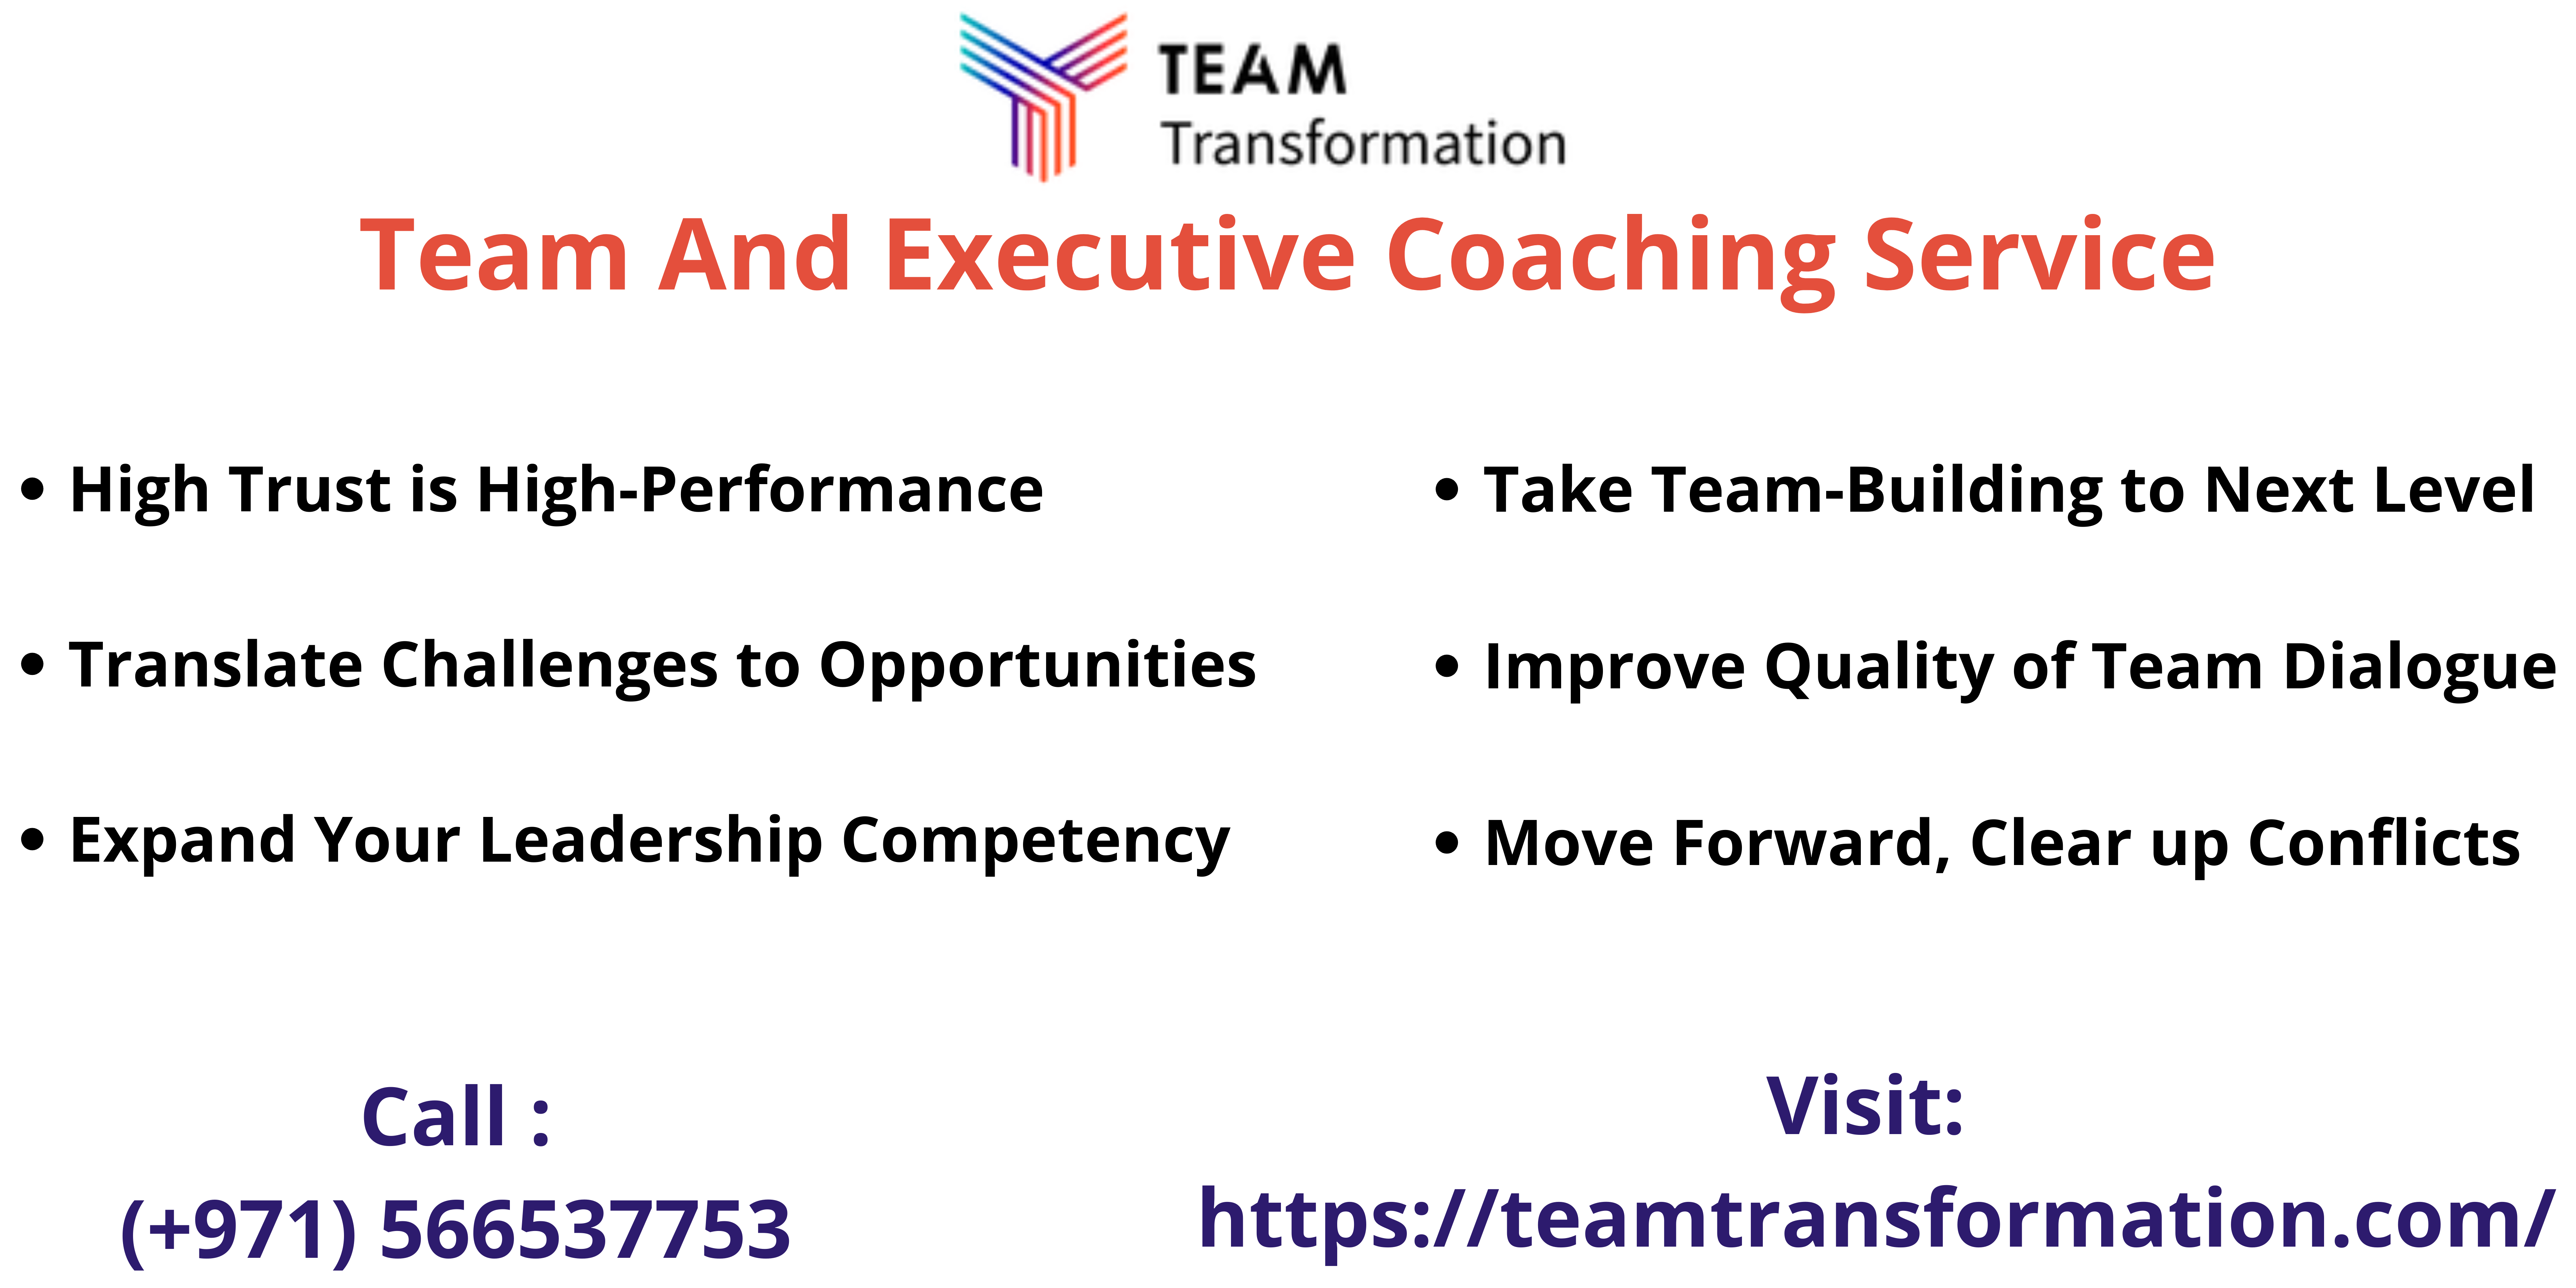 _Team Transformation URL 9.png  by teamtransformation